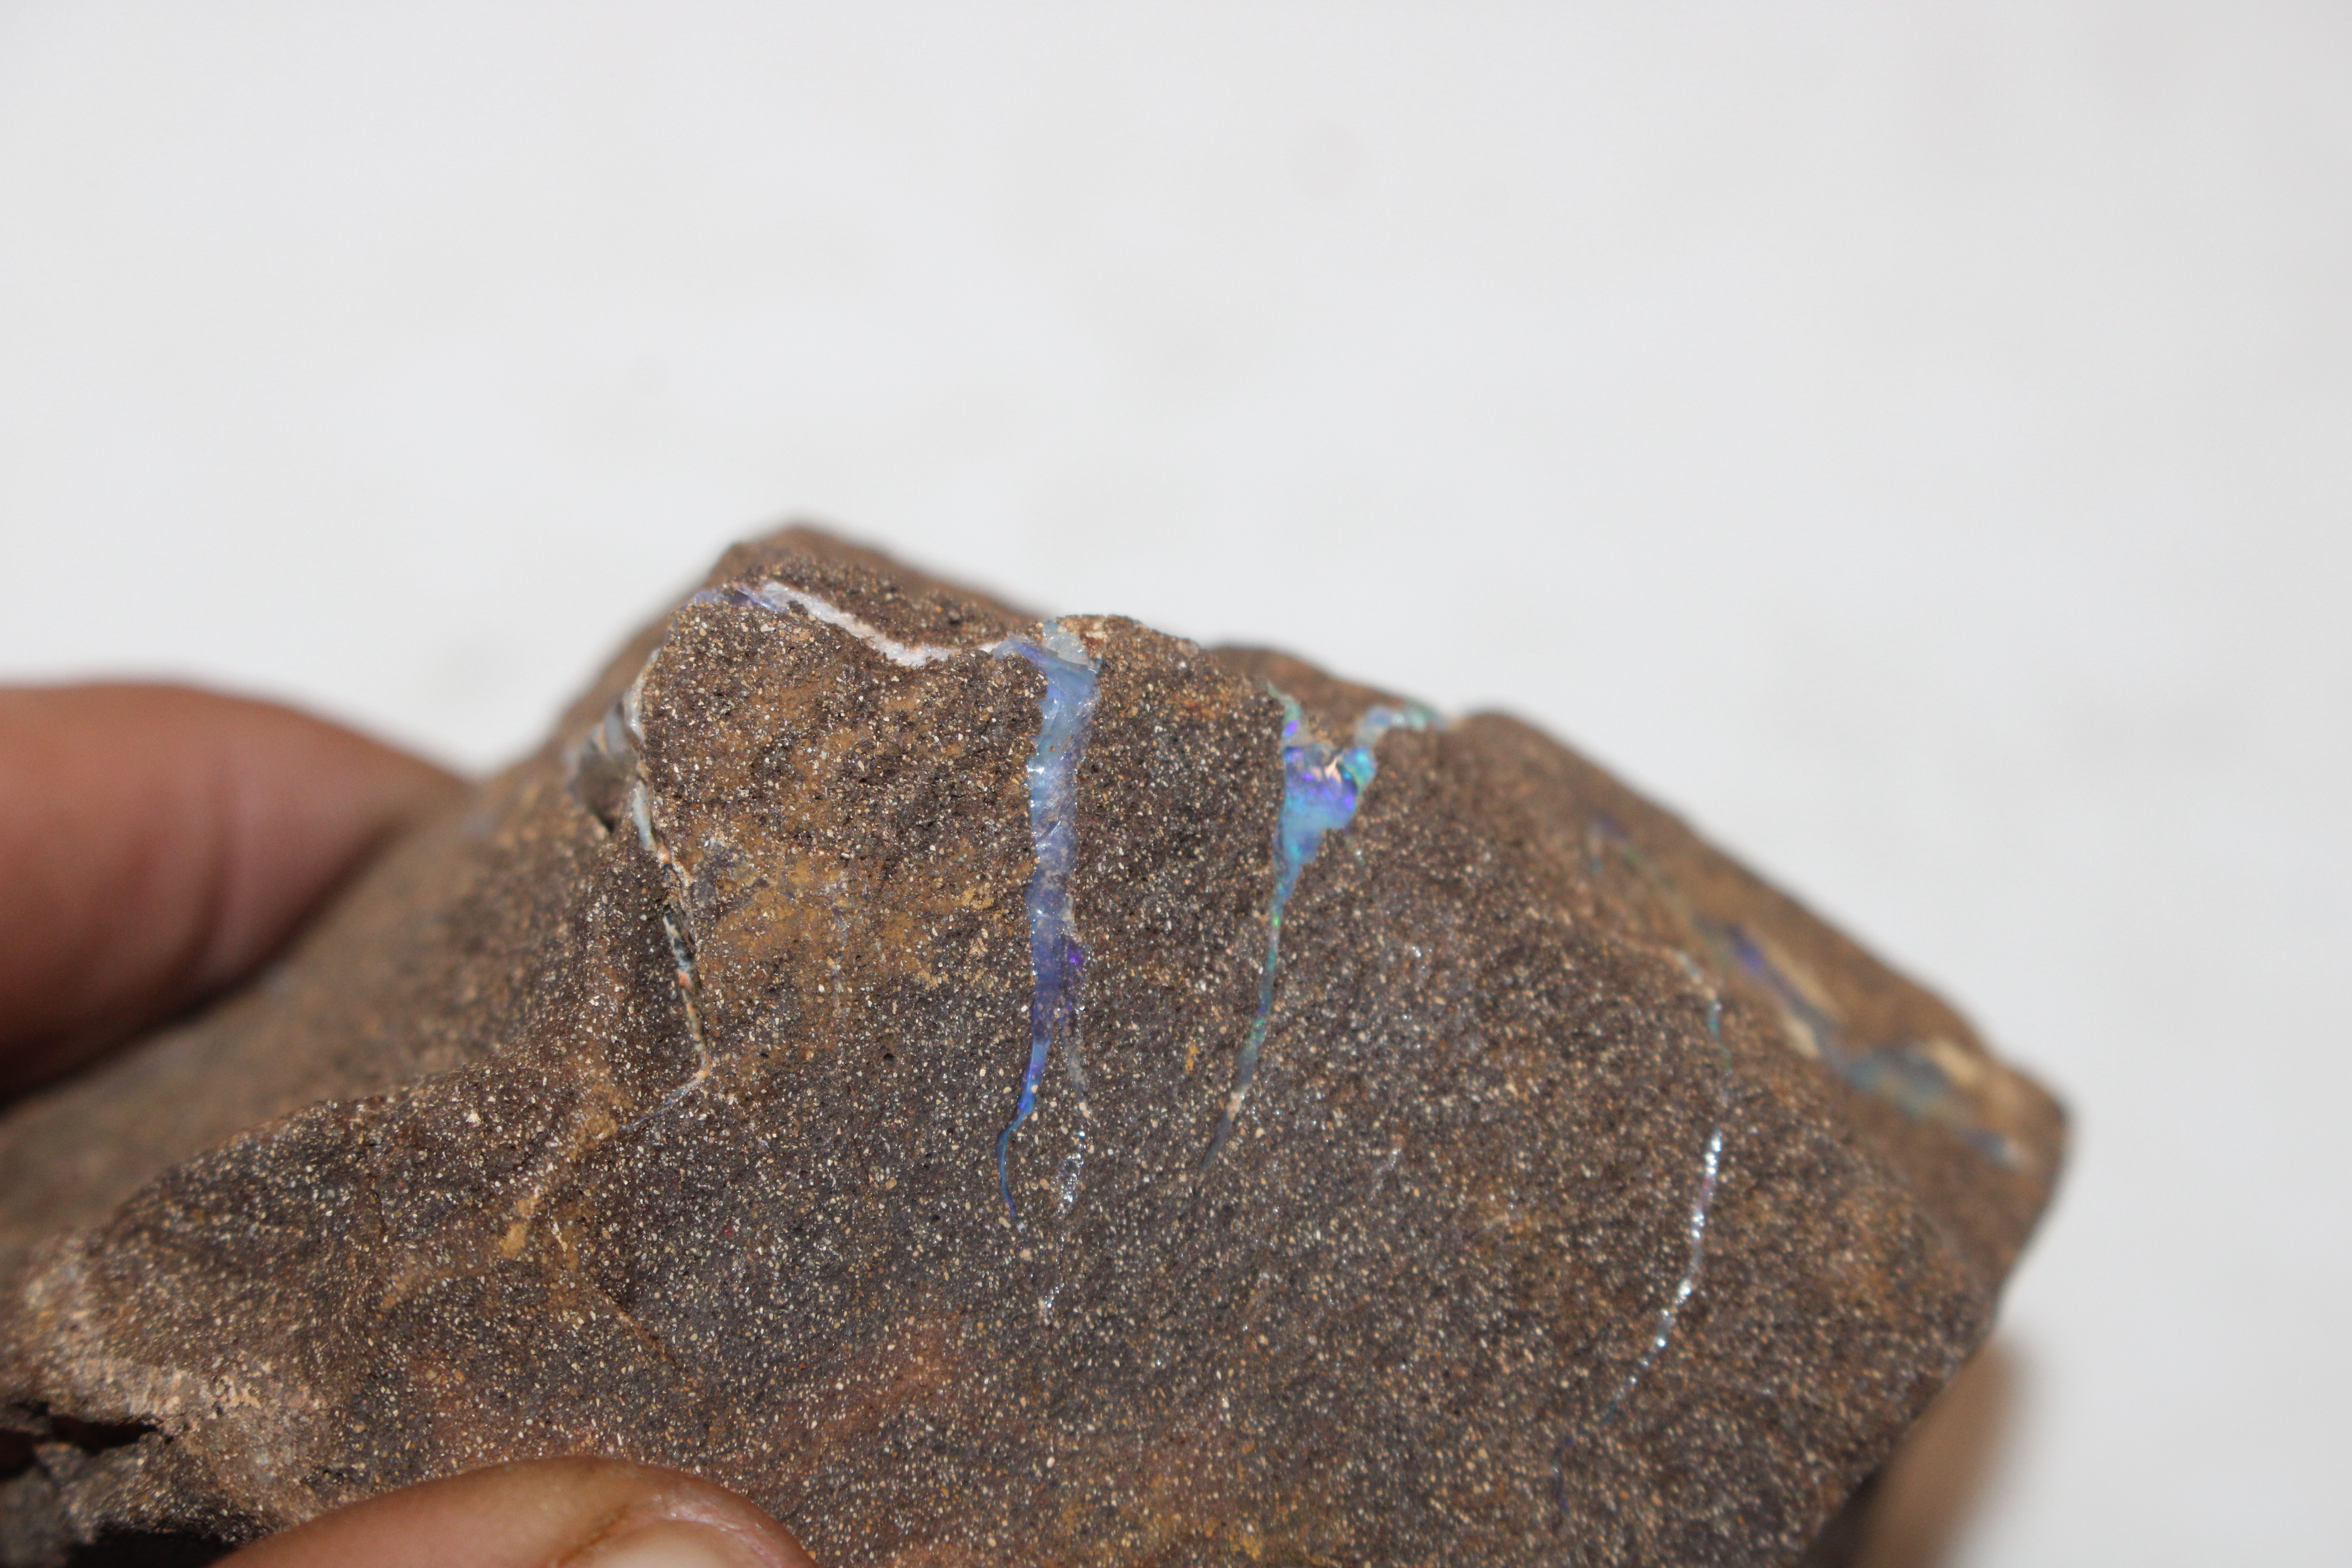 A box containing five pieces of rough Queensland Boulder Rock opal - Image 11 of 17